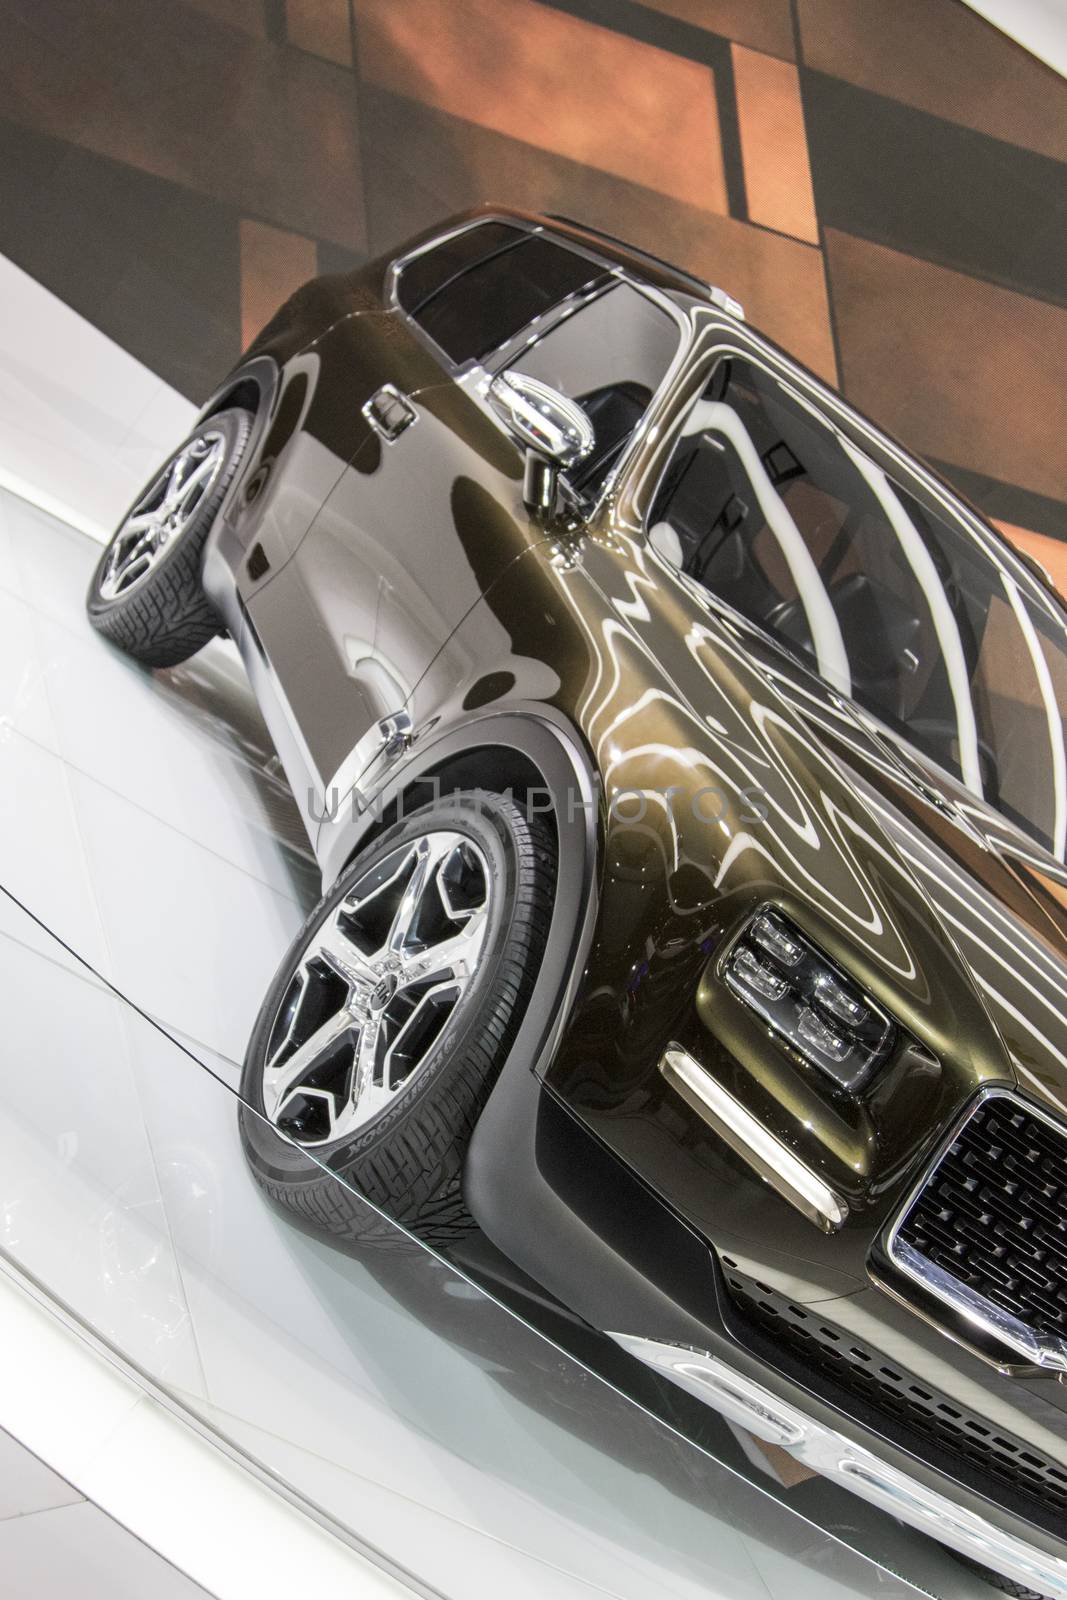 DETROIT - JANUARY 17 :The 2017 Kia Telluride concept at The North American International Auto Show January 17, 2016 in Detroit, Michigan.